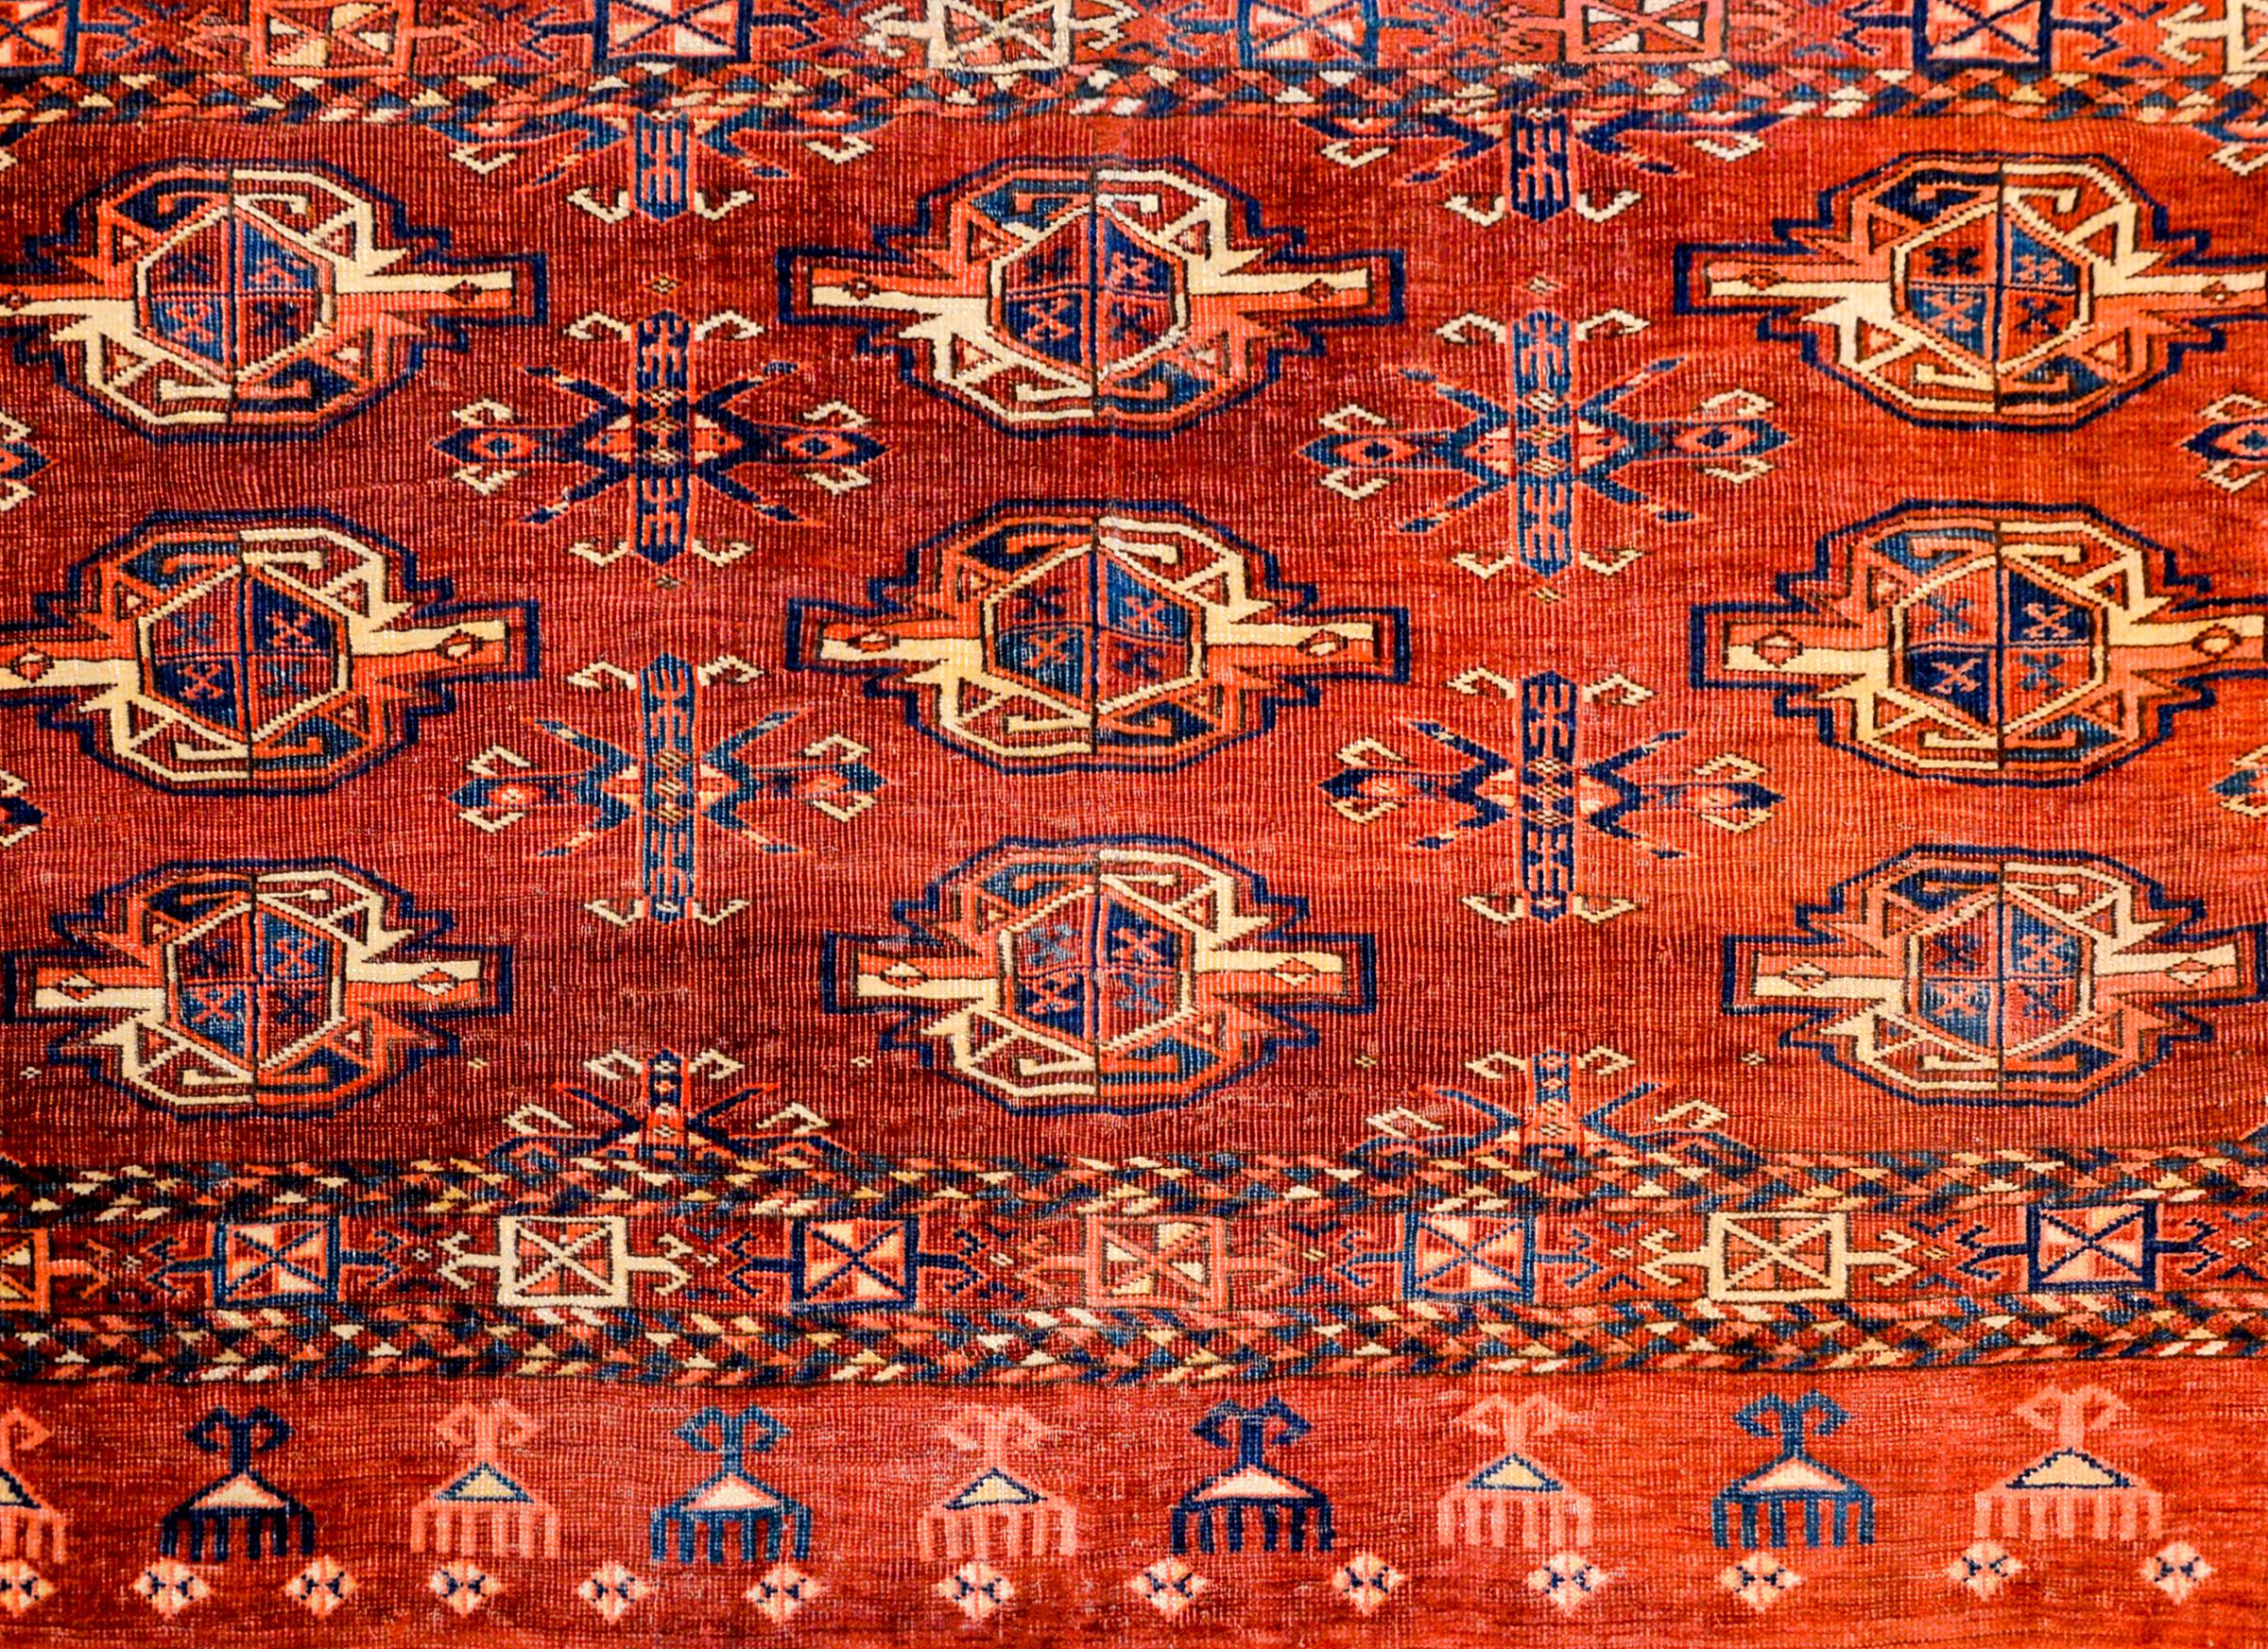 An early 20th century Persian Teke bag face rug with multiple geometric form shapes woven in indigo, crimson, and gold, on a bright crimson background surrounded by a complementary geometric patterned border.